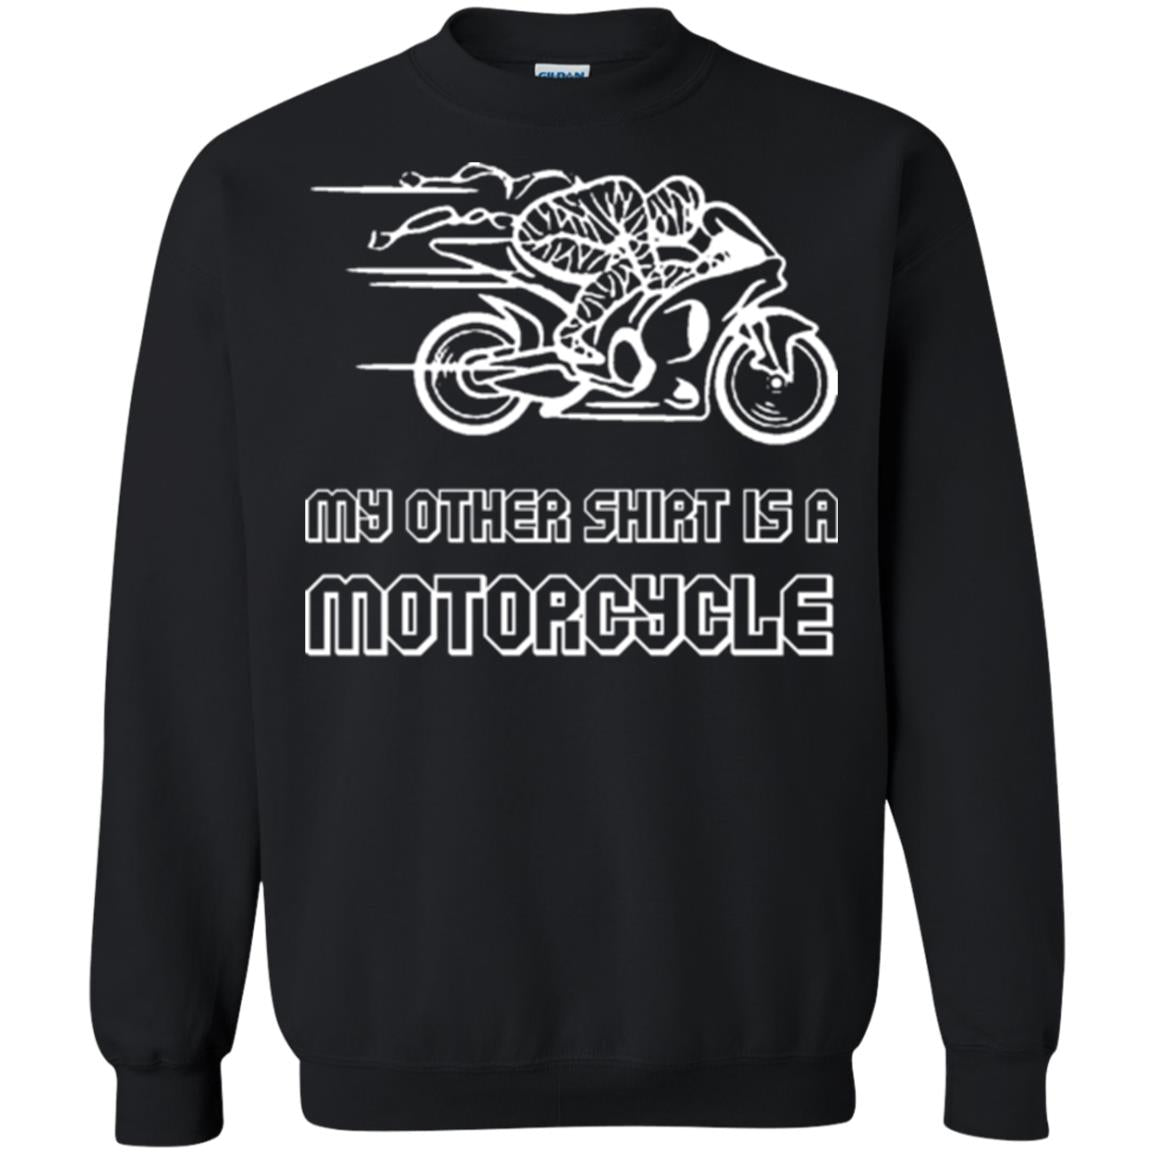 My Other Shirt Is A Motorcycle T-shirt